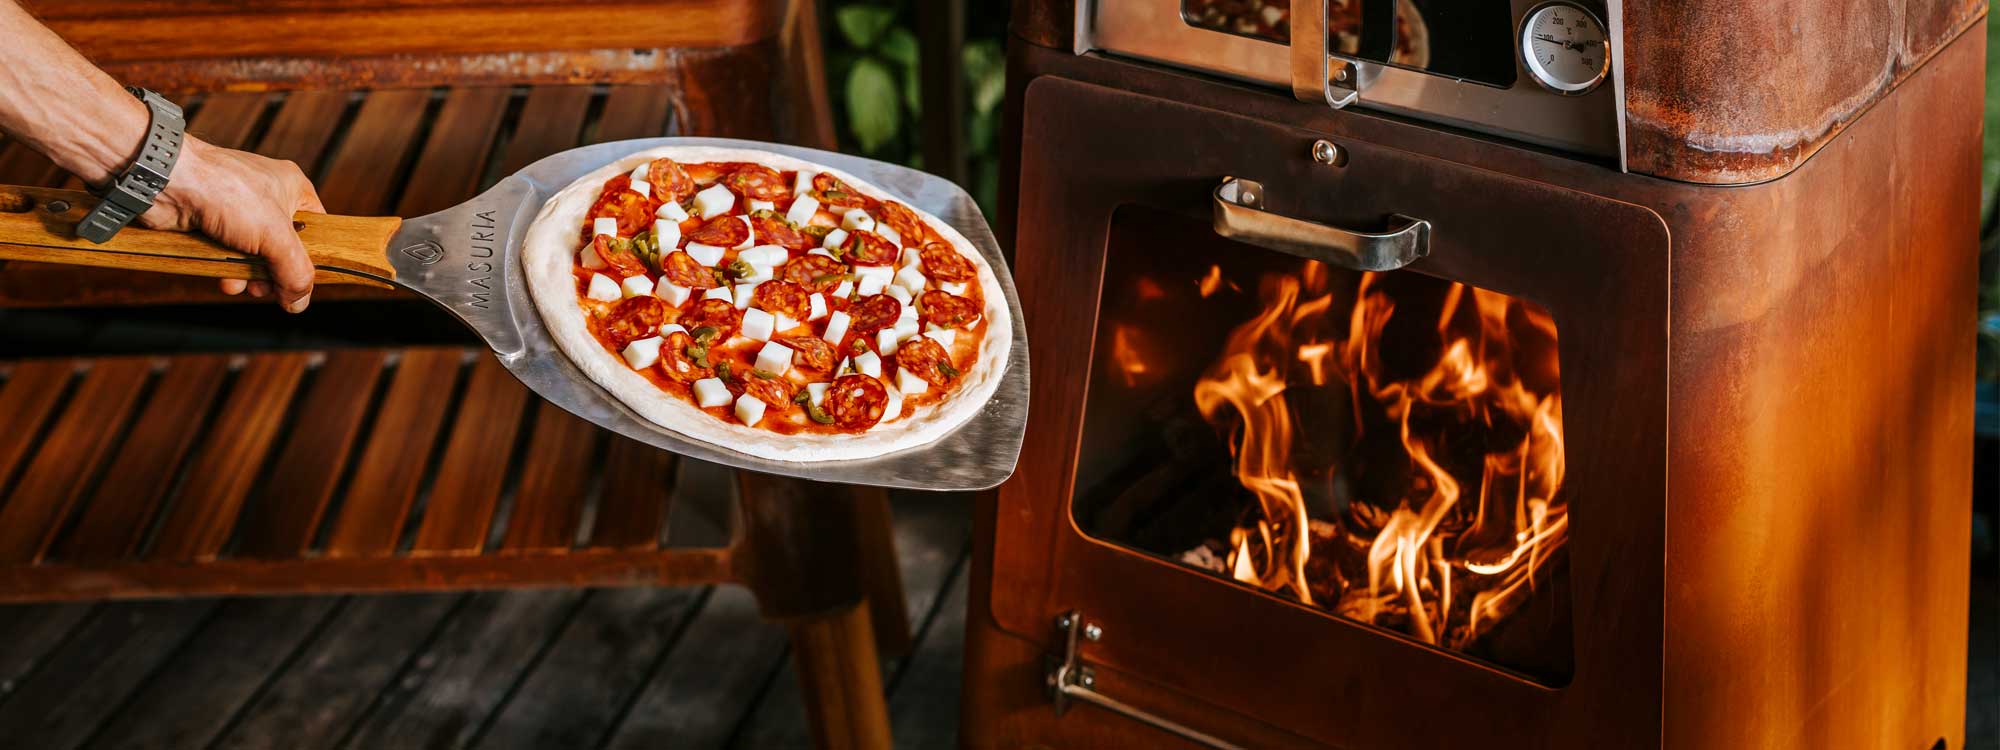 Masuria M-CLASSIC Modern OUTDOOR STOVE & PIZZA OVEN Is A WOOD-BURNING Pizza Oven & GARDEN FIREPLACE In HIGH QUALITY Pizza Oven Materials. Ideal Gifts for the Garden